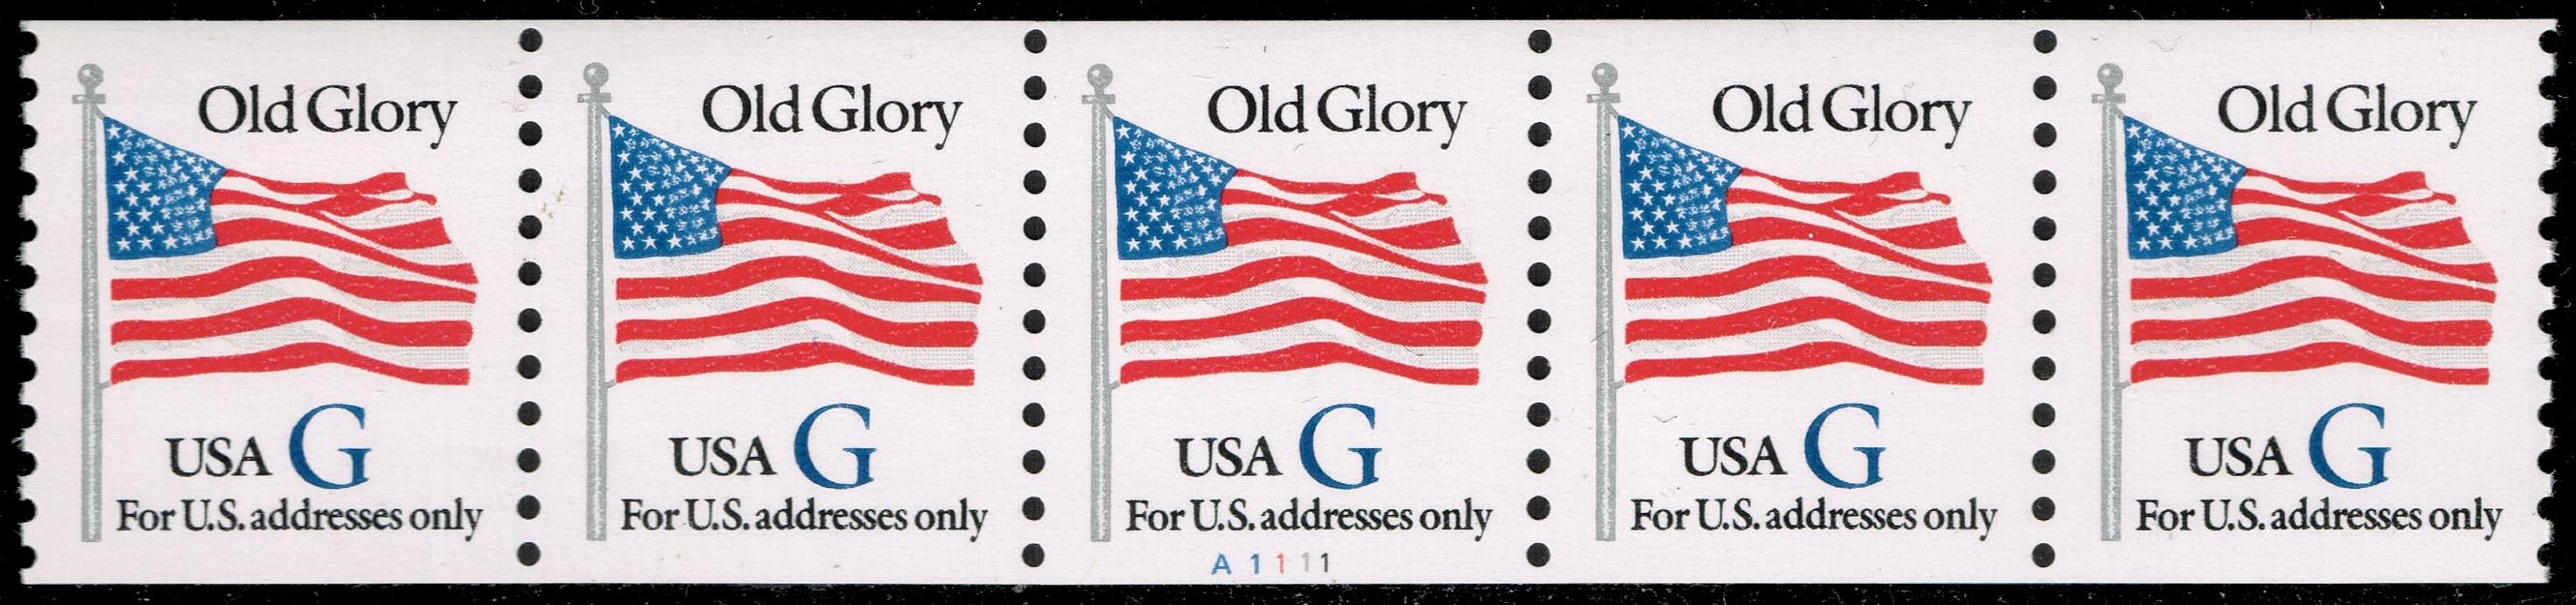 US #2890 Old Glory - Blue G PNC Strip of 5 - #A1111; MNH - Click Image to Close